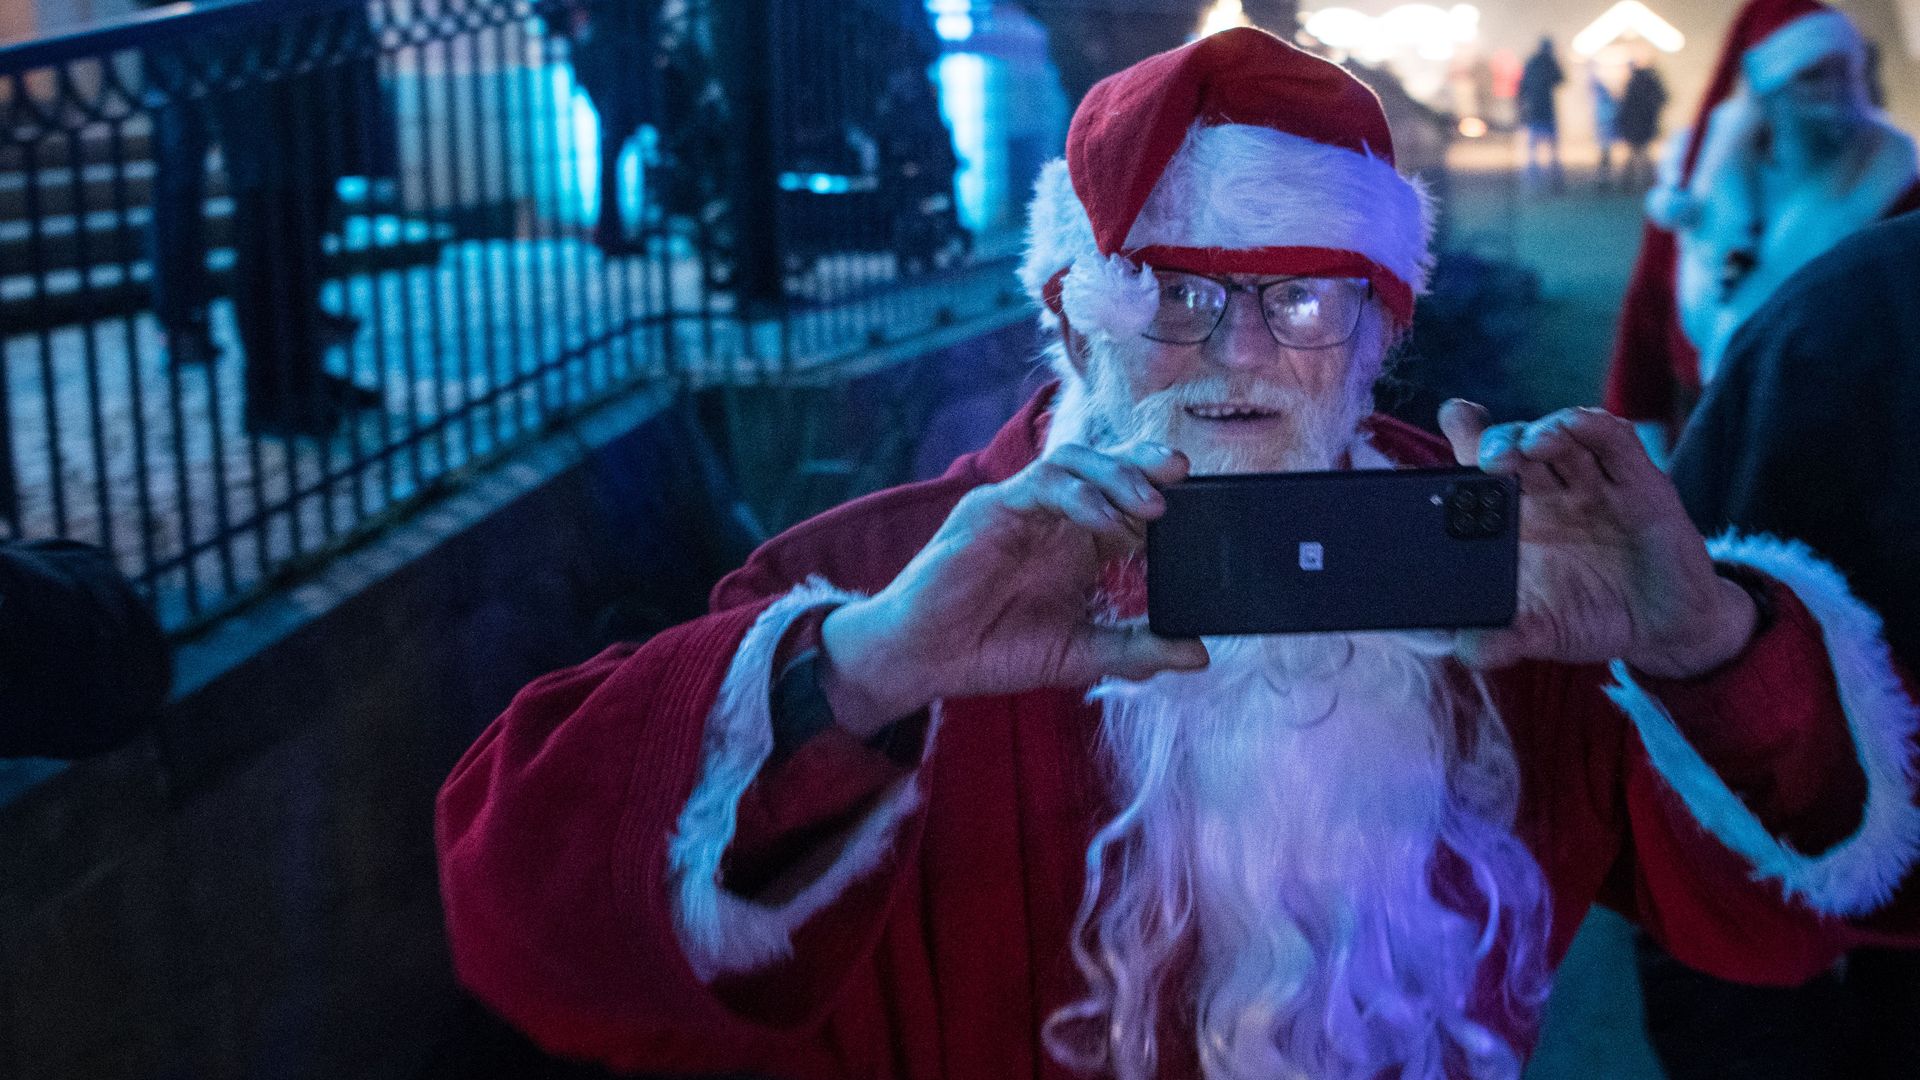 A man dressed as Santa Claus takes a picture during a Santa Claus General Assmbly